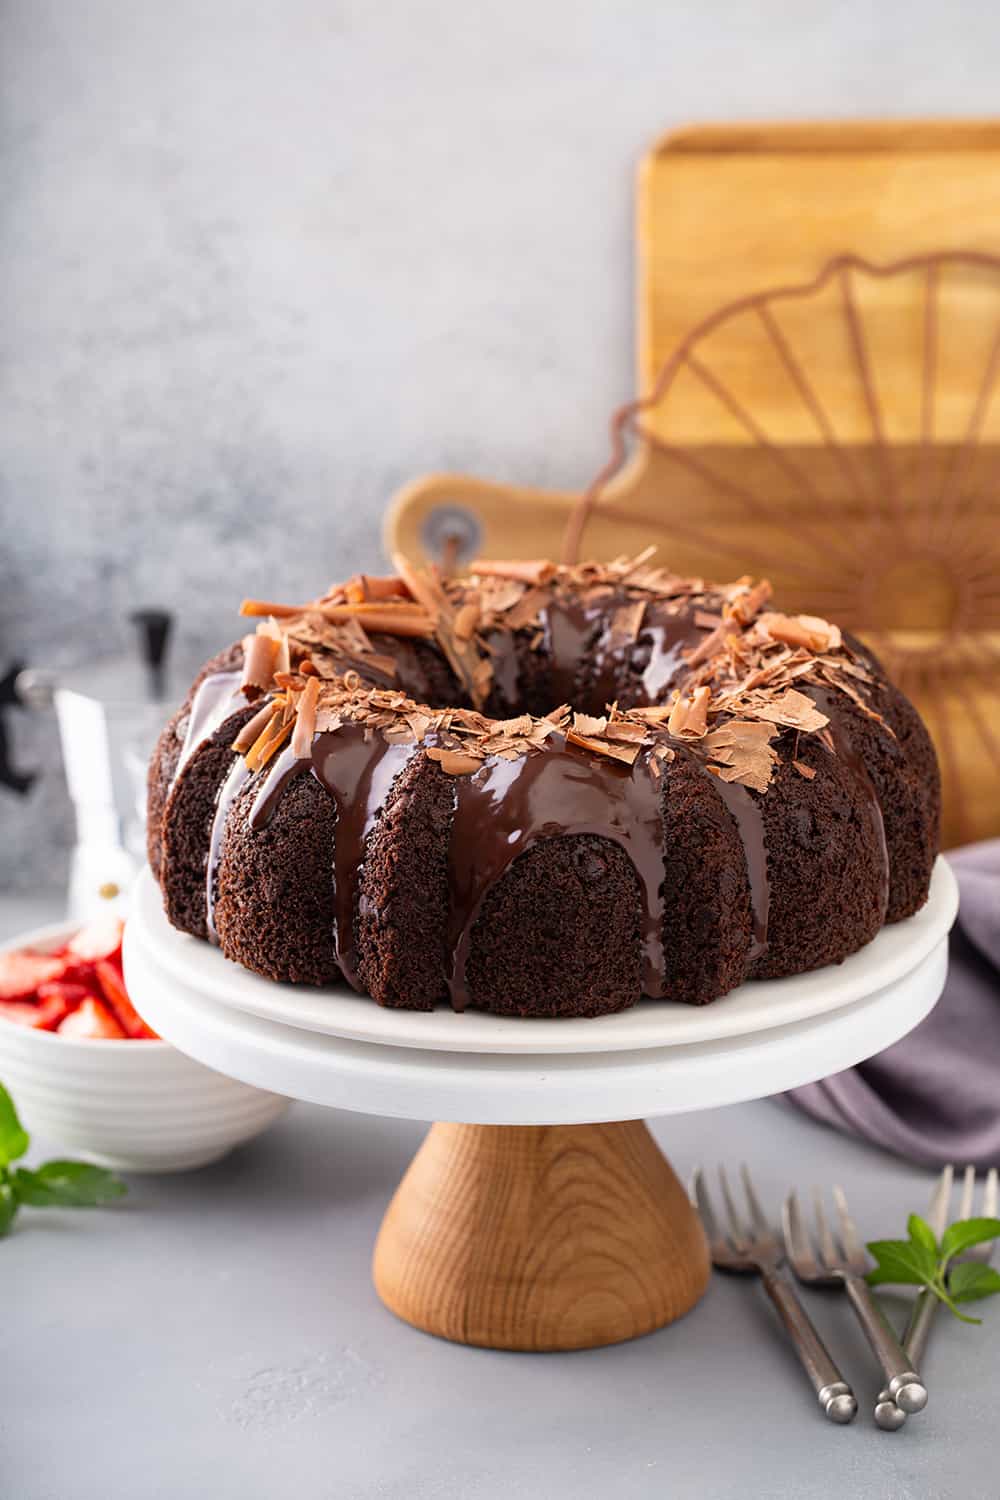 How to Make a Decadent Triple Chocolate Bundt Cake (from a Mix